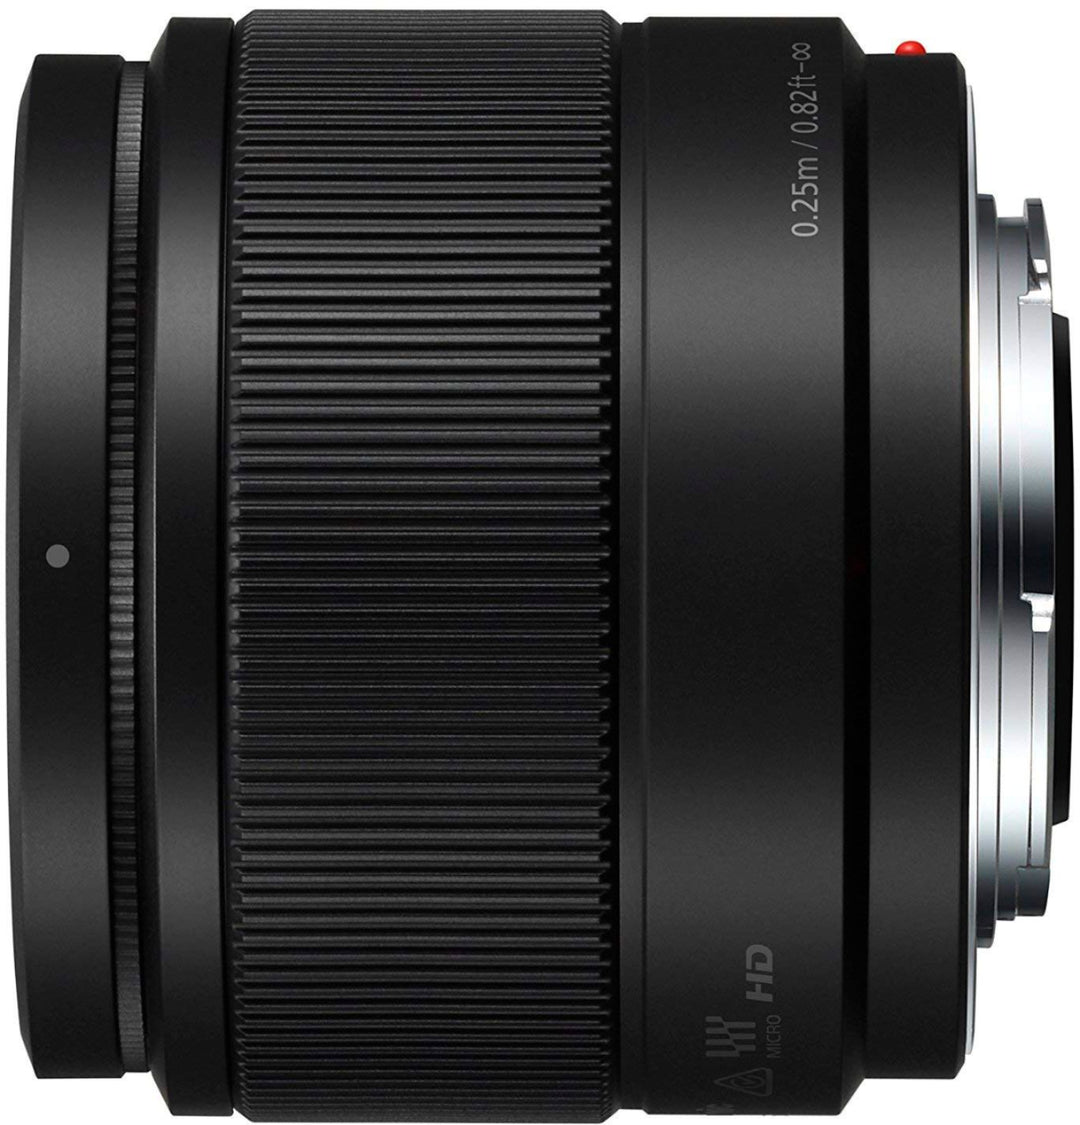 Panasonic - LUMIX G 25mm f/1.7 ASPH. Lens for Mirrorless Micro Four Thirds Compatible Cameras, H-H025-K - Black_4